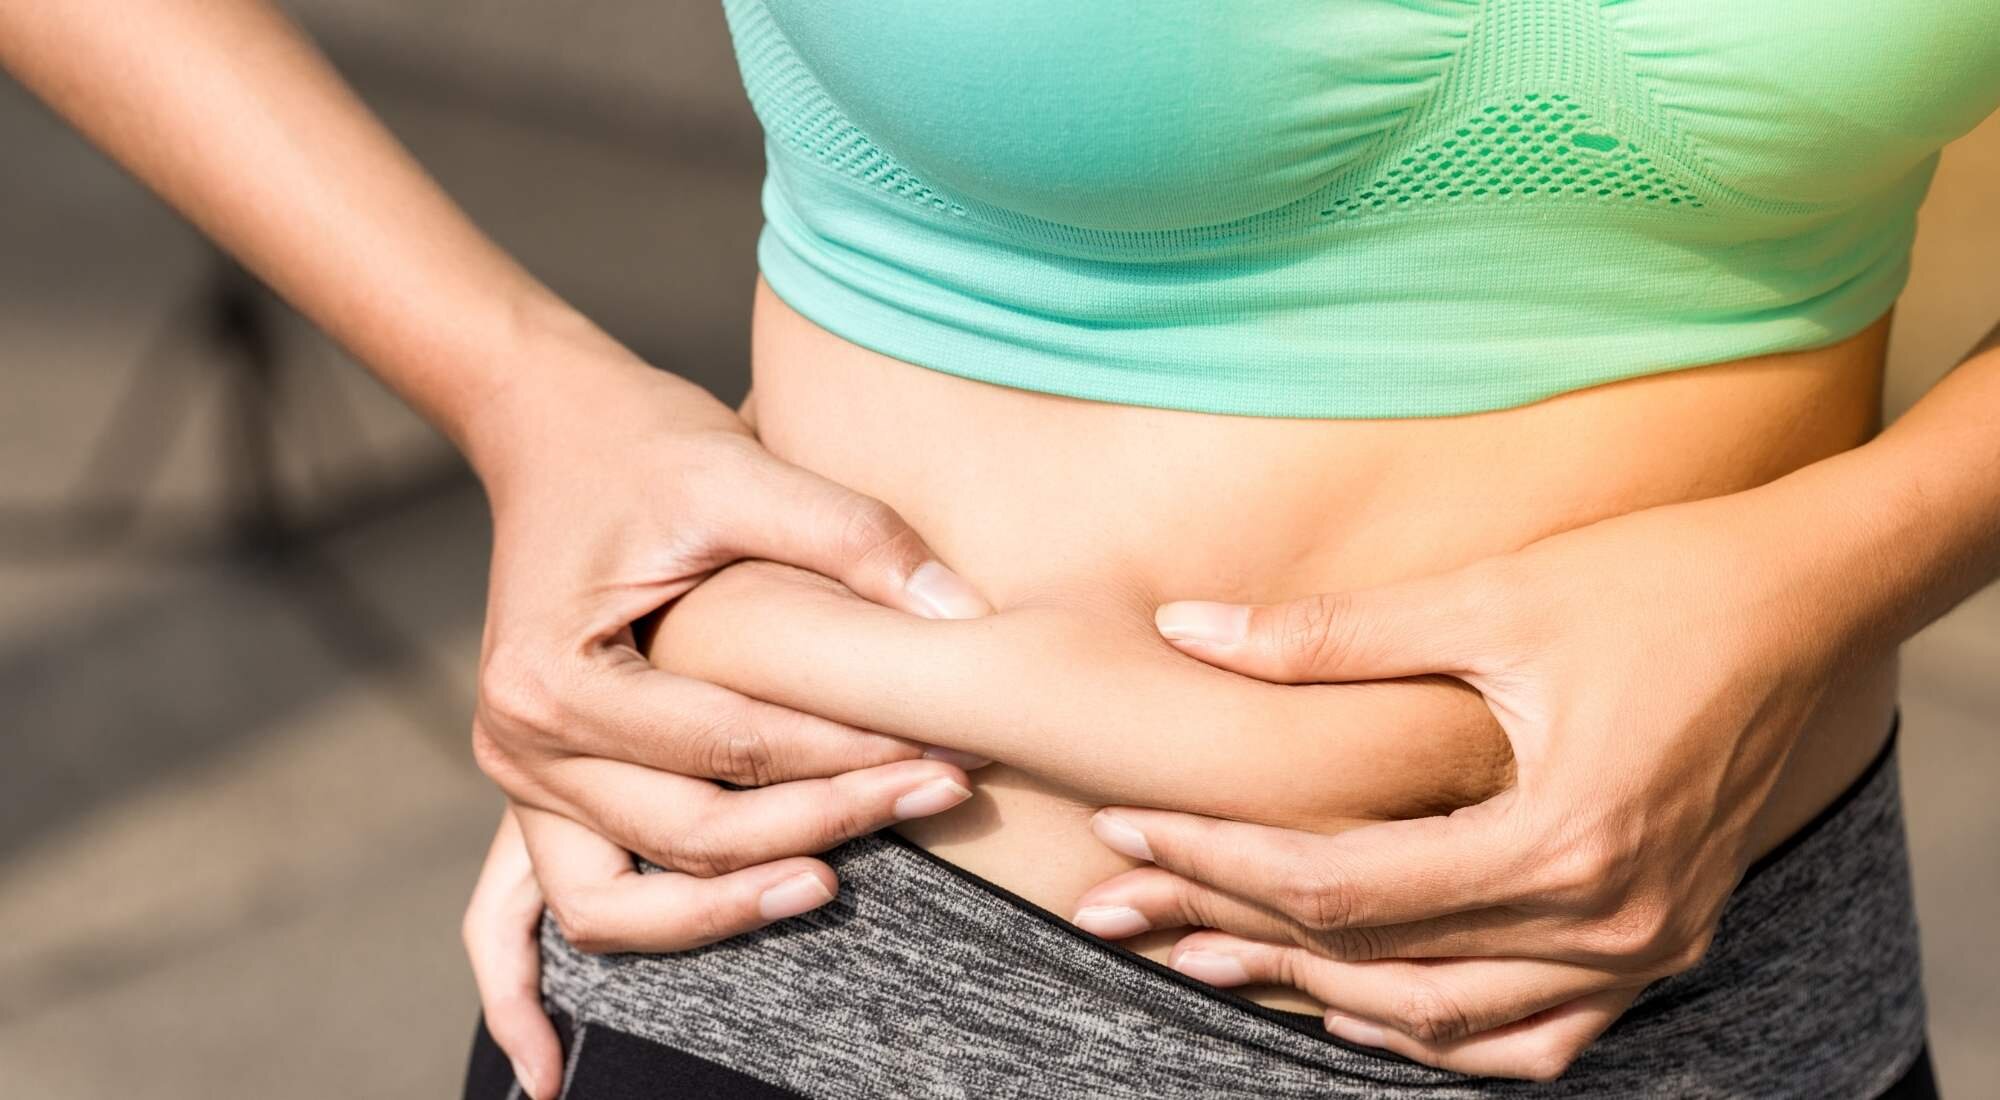 Coolsculpting Side Effects  Everything You Need To Know